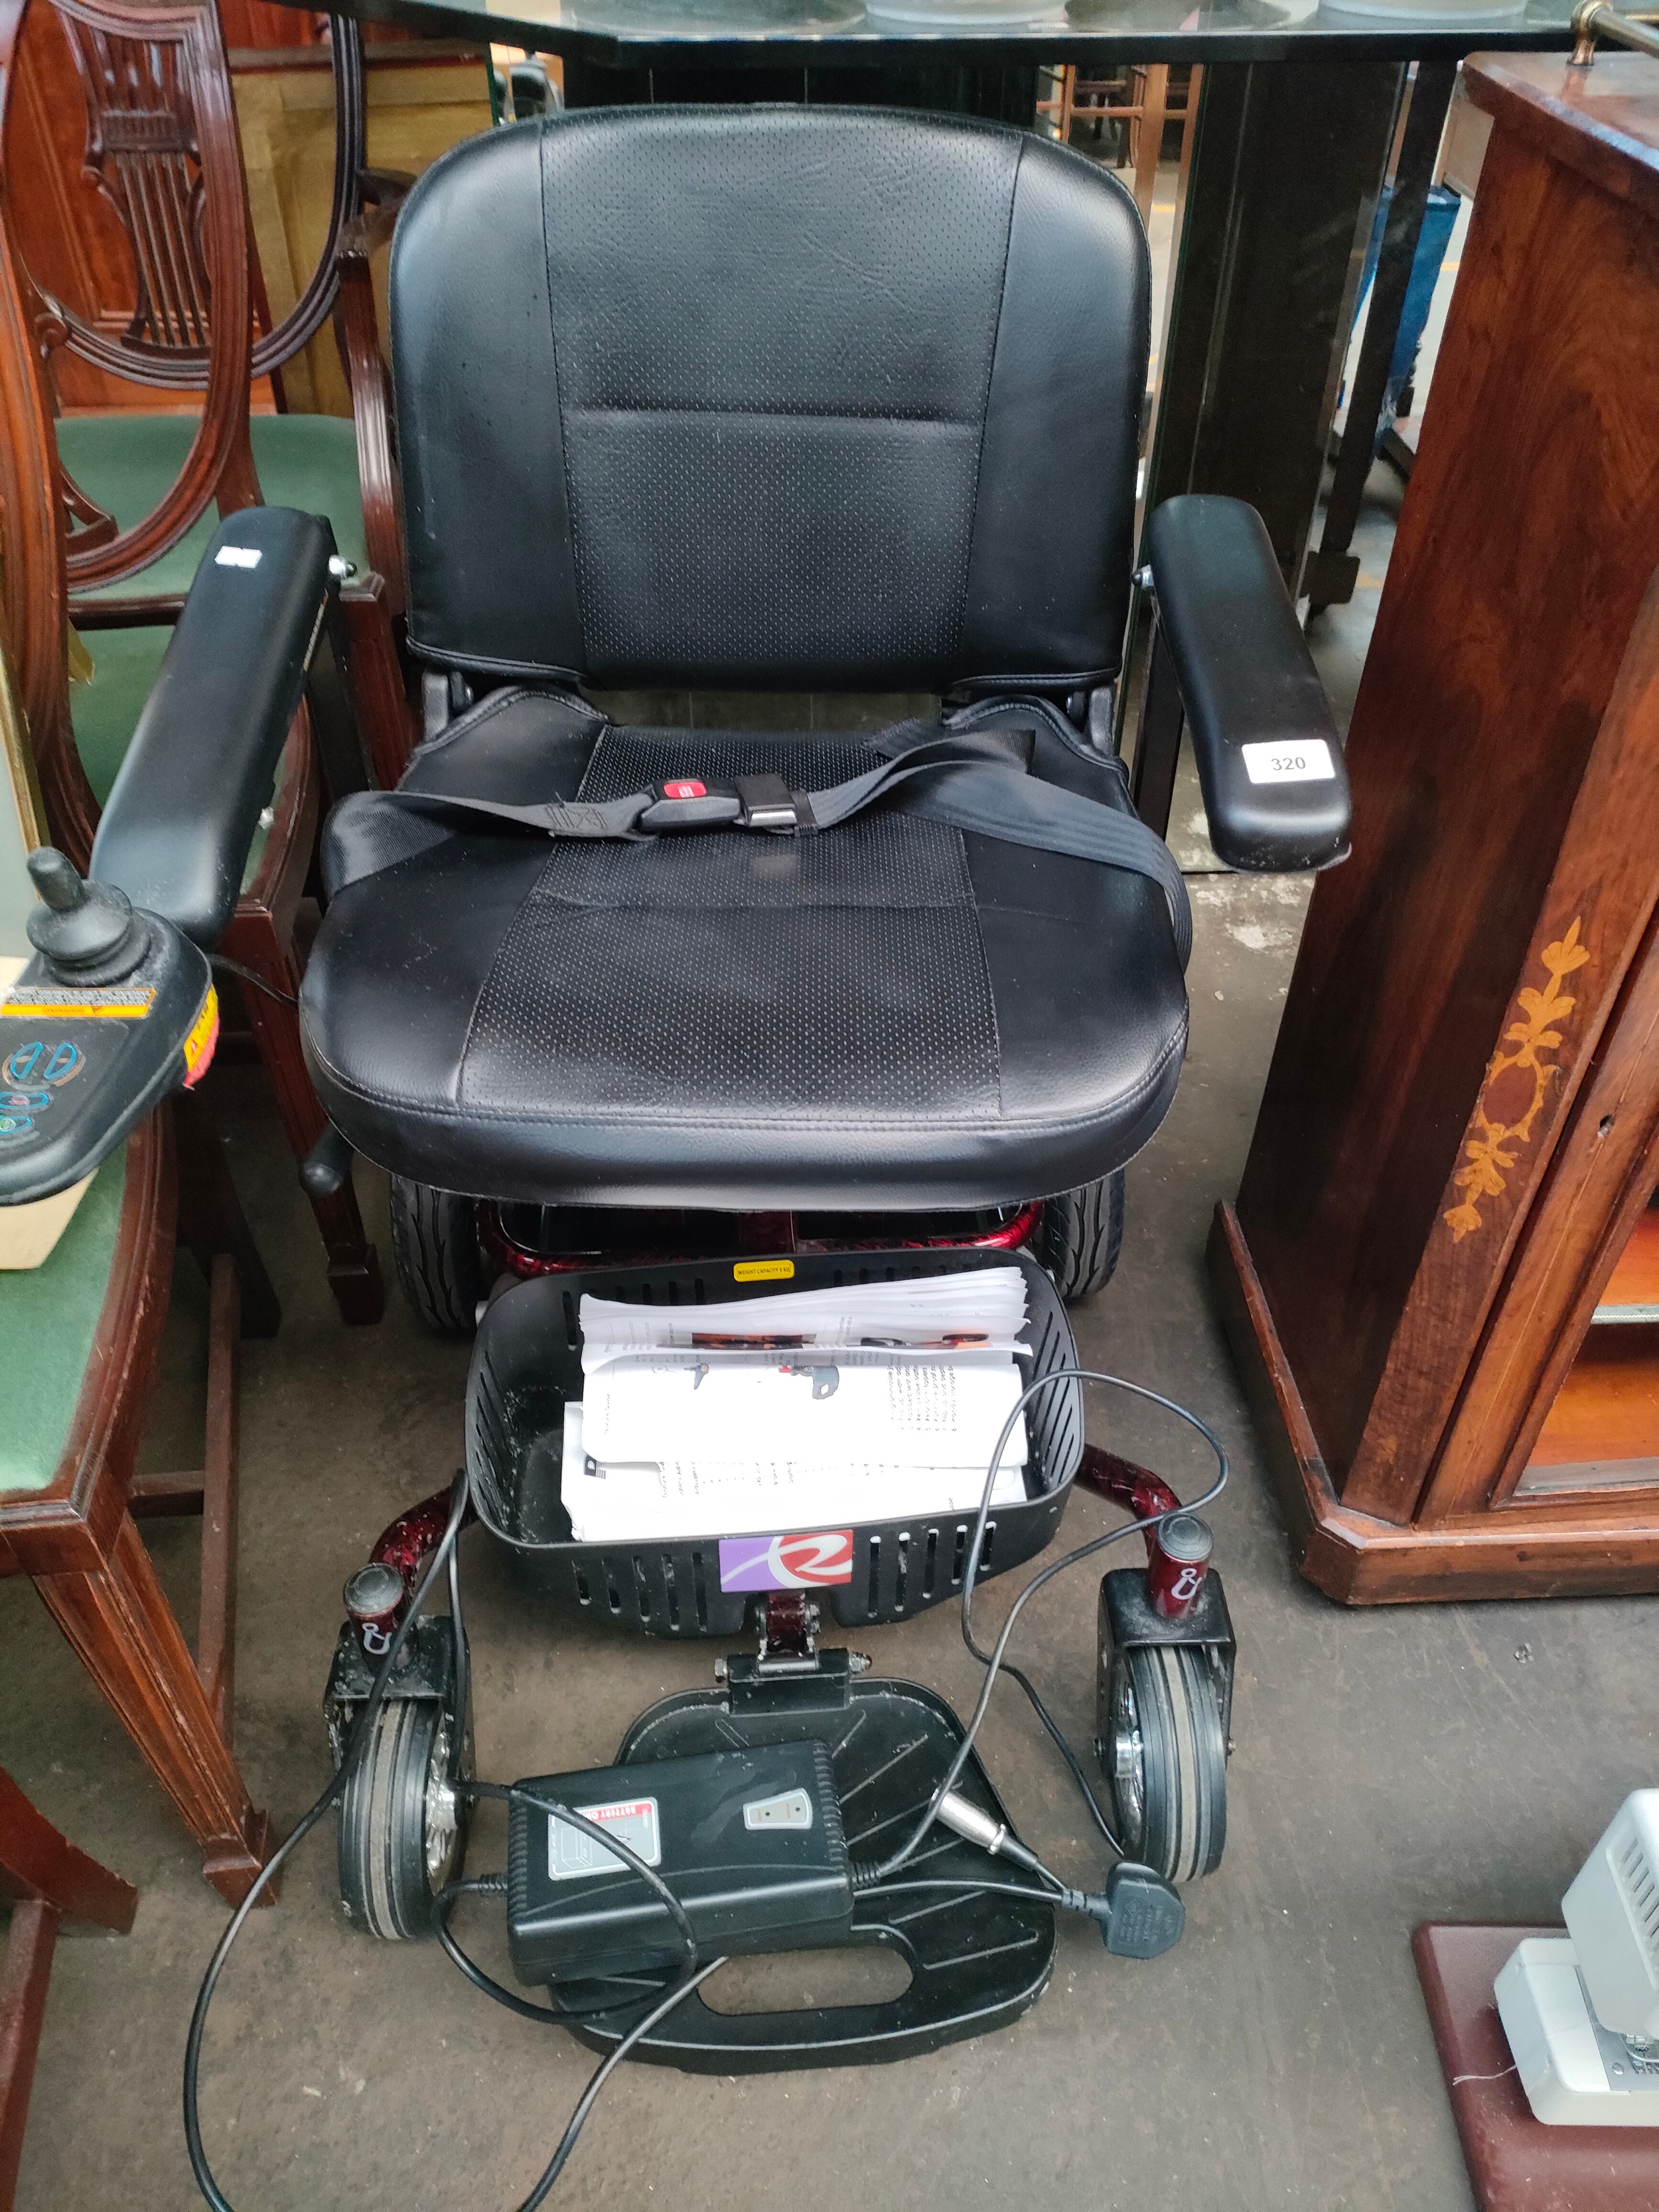 Roma Disability scooter, comes with charger and booklet. Not tested. - Image 2 of 3